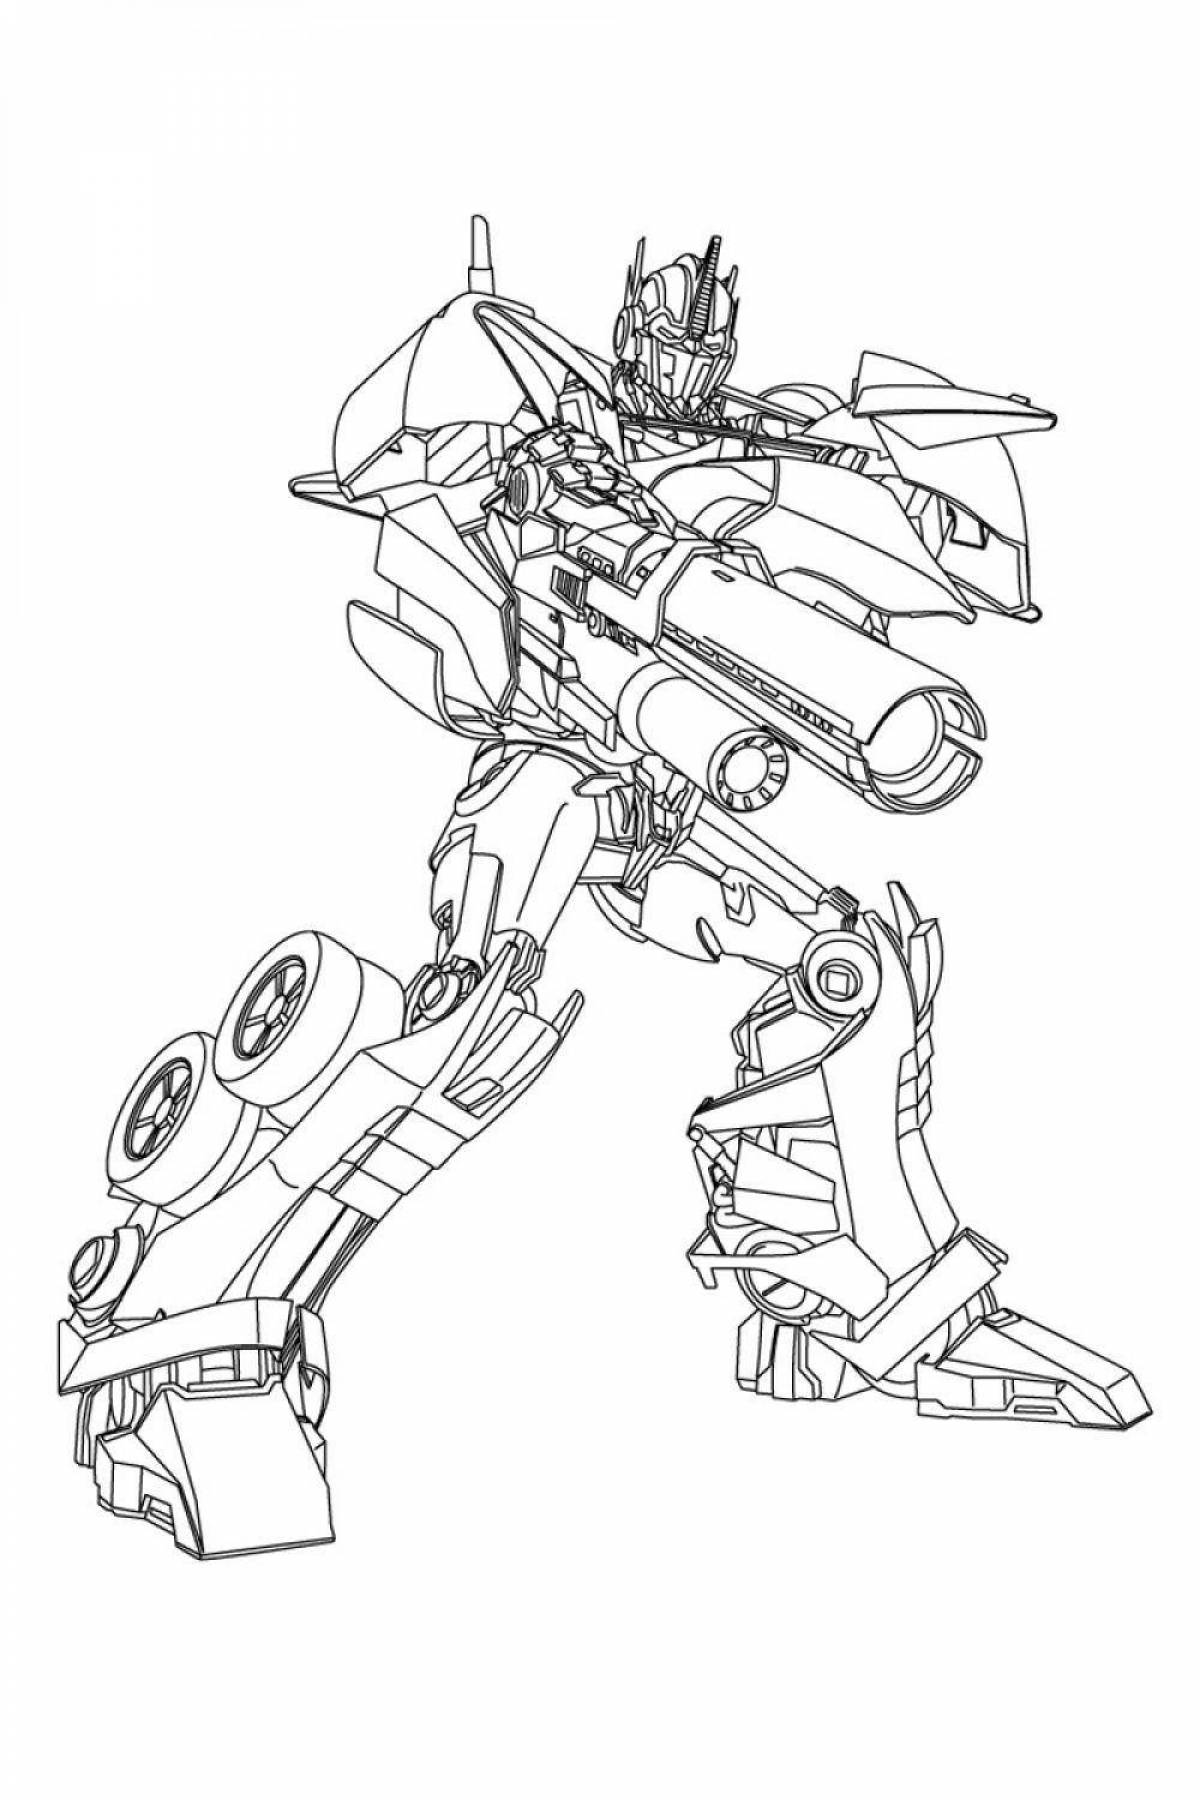 Exquisite transformers coloring pages for boys